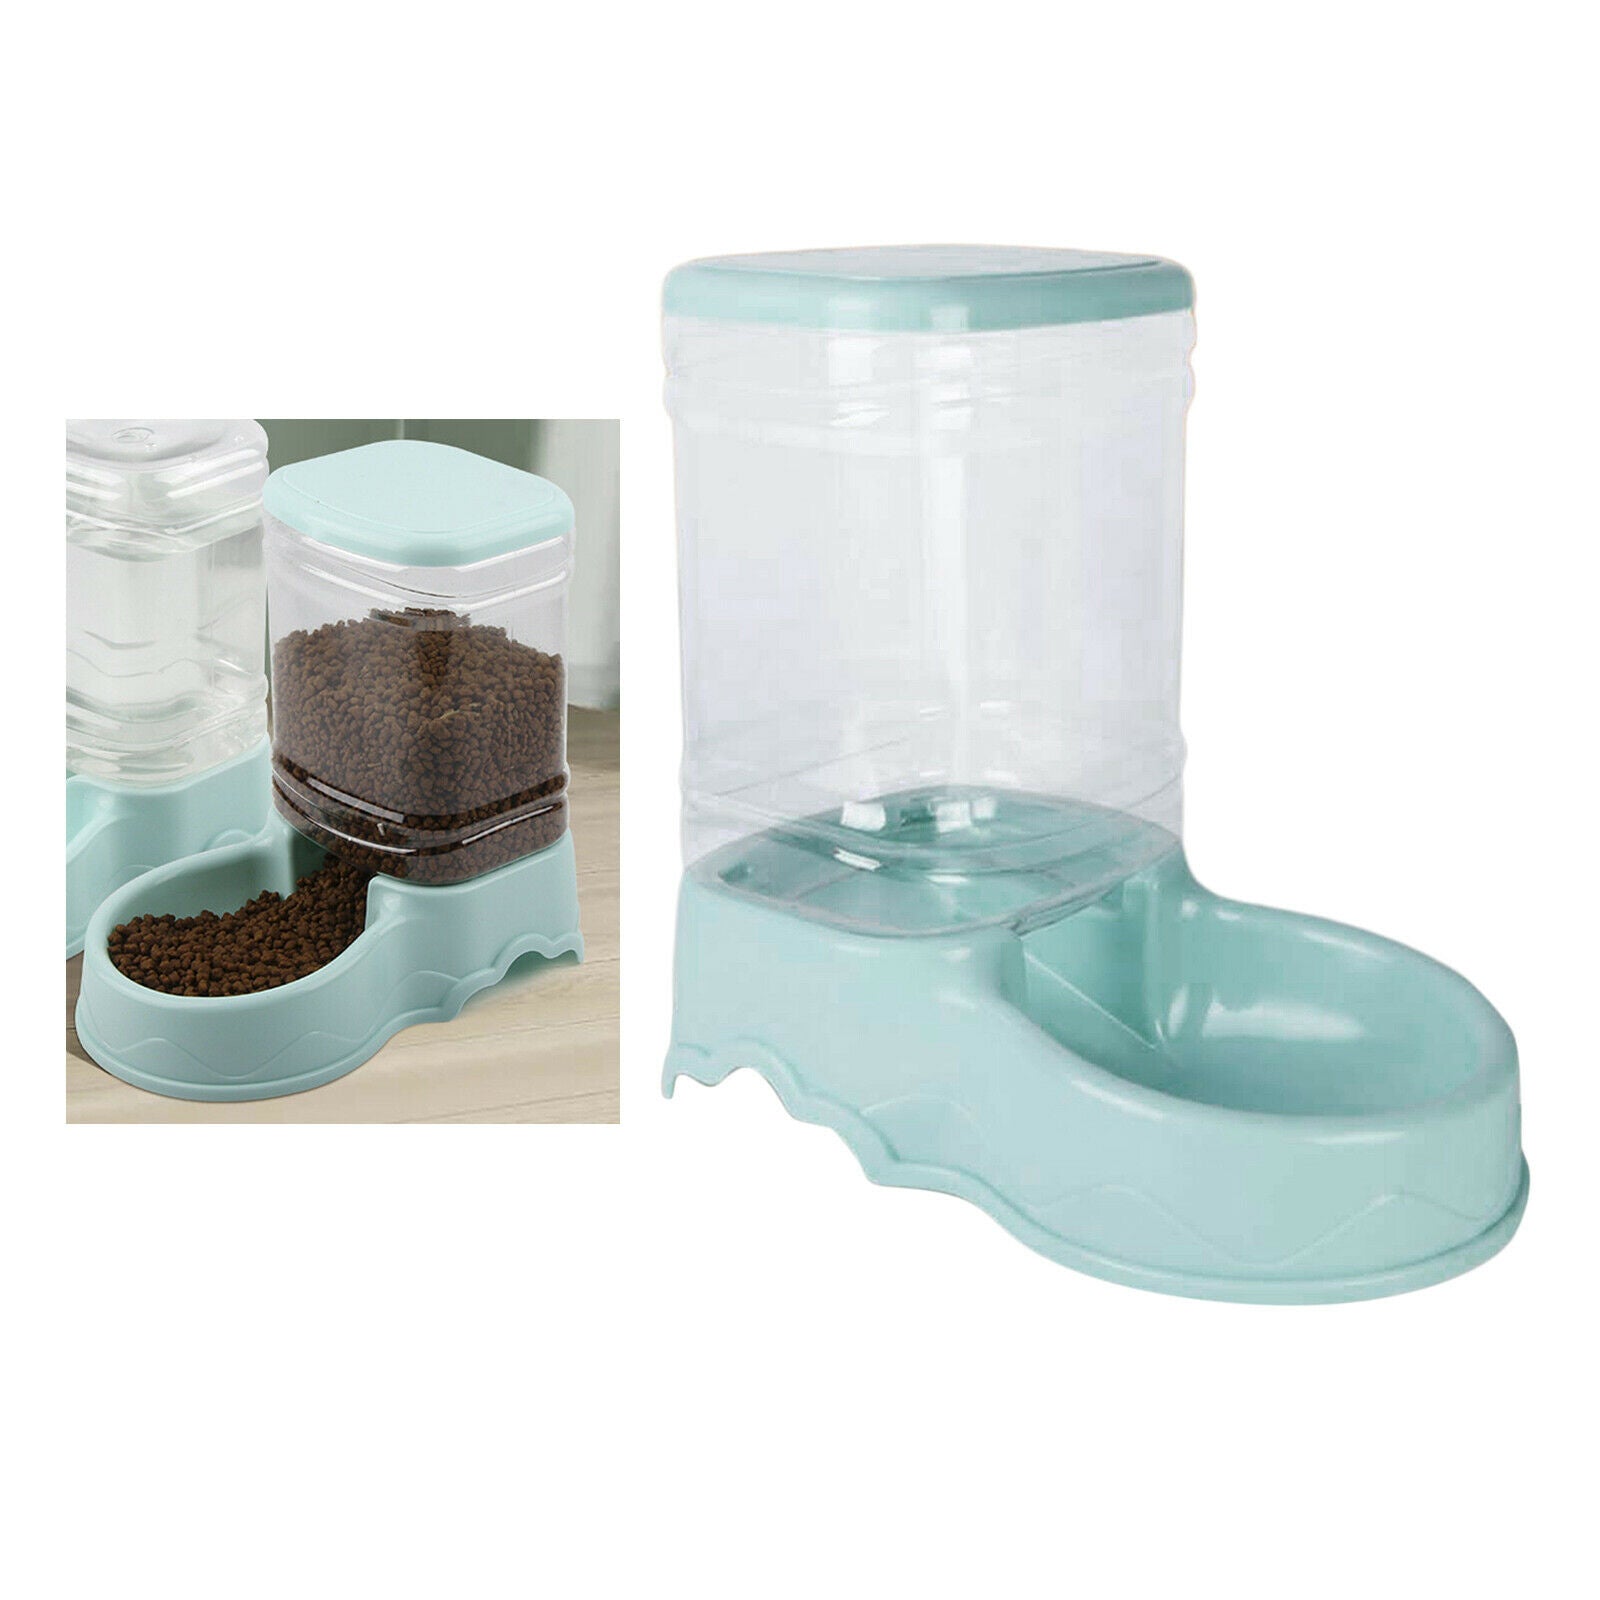 2 pieces 3.5L Cats Large Water Feeder WATER DISPENSER Small Medium Large Dog